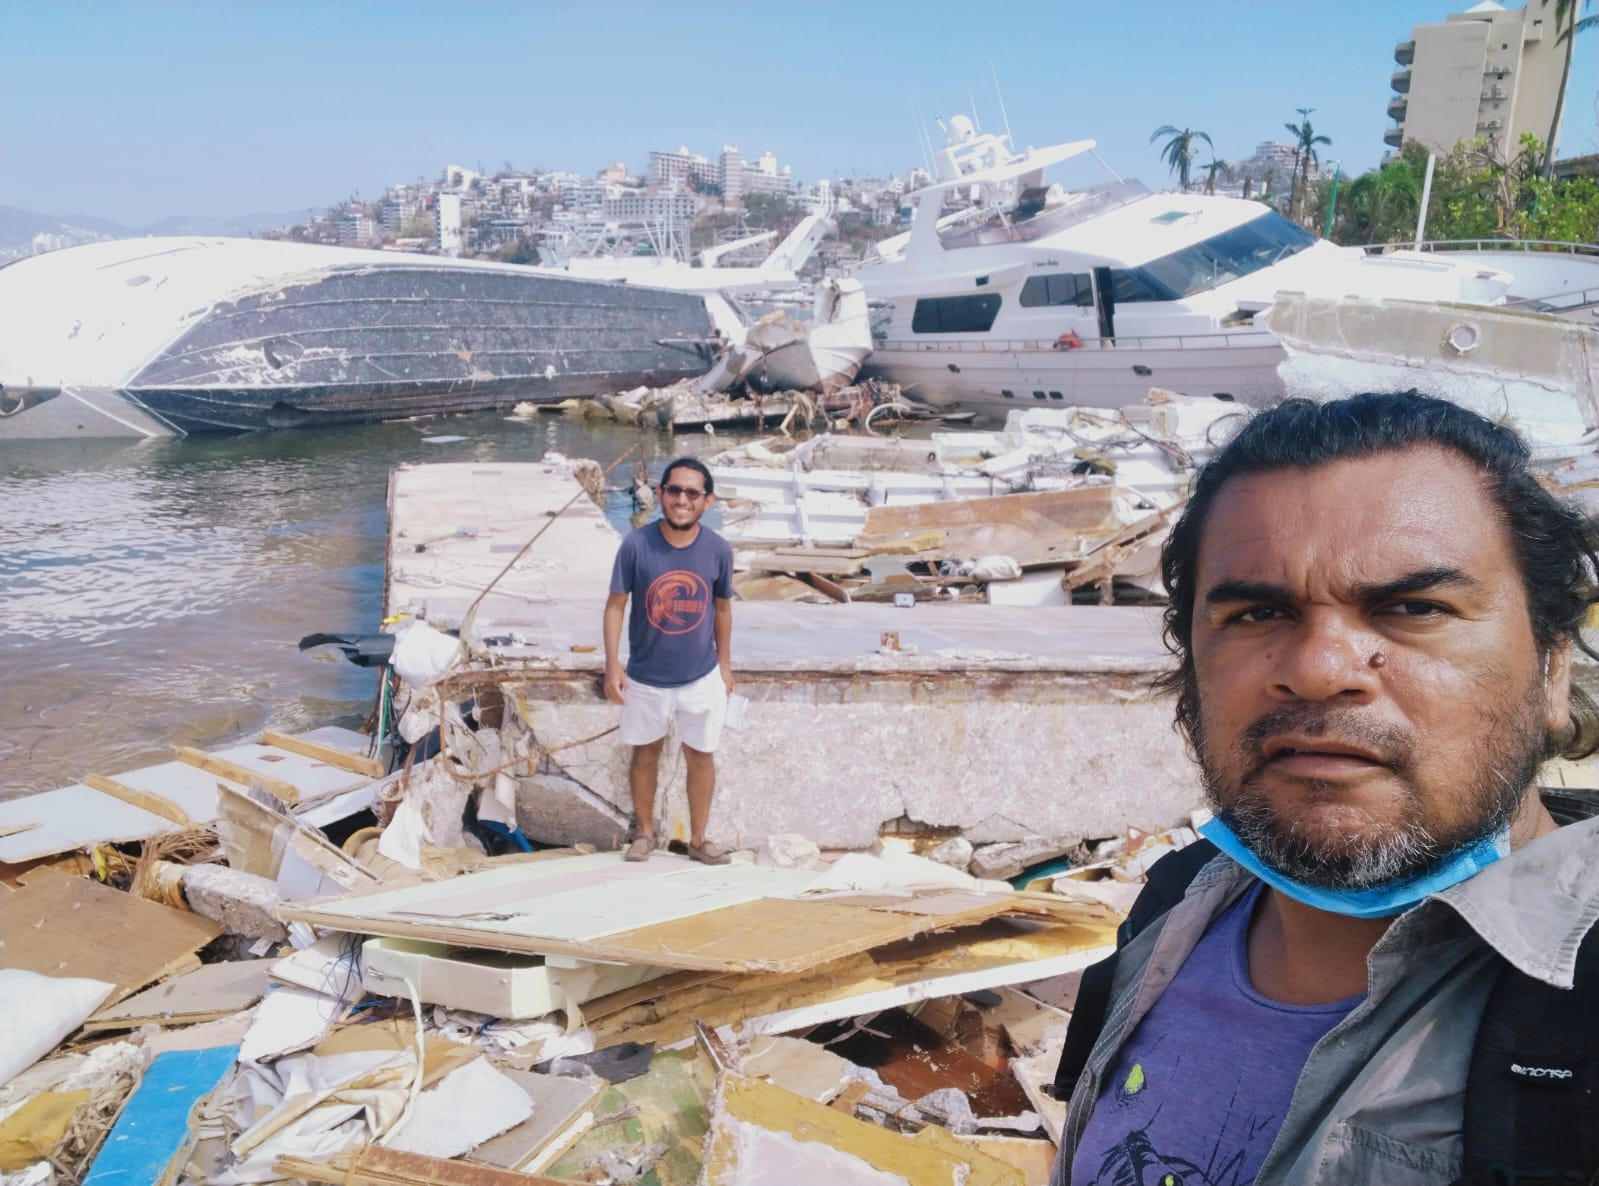 Mexican journalist Carlos Carbajal takes a selfie of him and a colleague during their coverage of the devastation left by Hurricane Otis, in Acapulco, Mexico. 